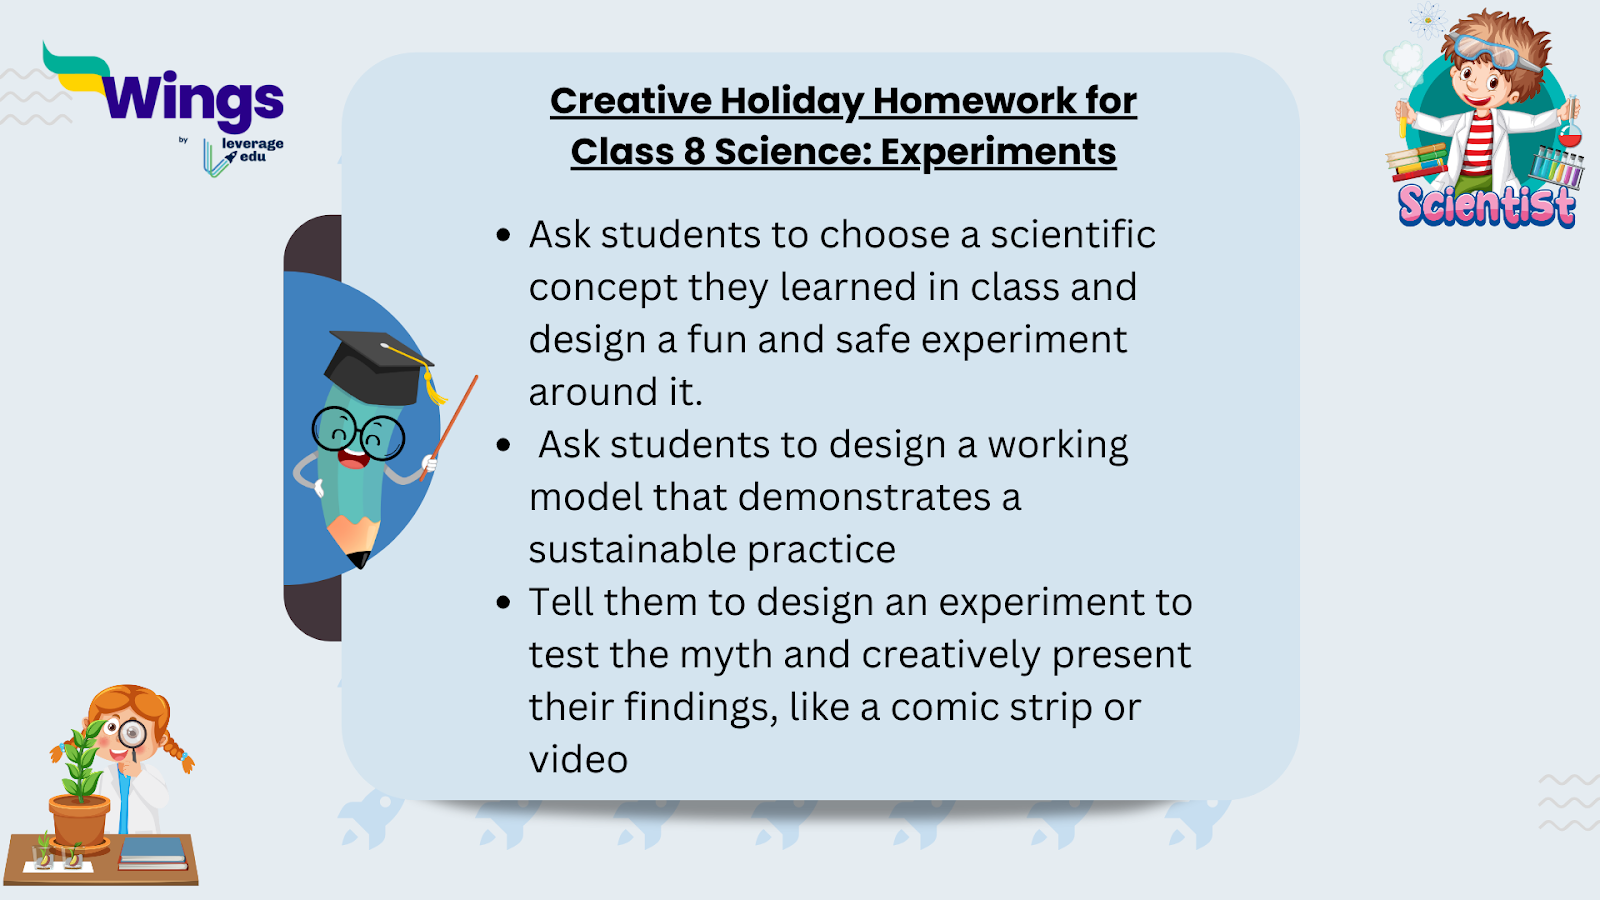 Creative holiday homework for class 8 science